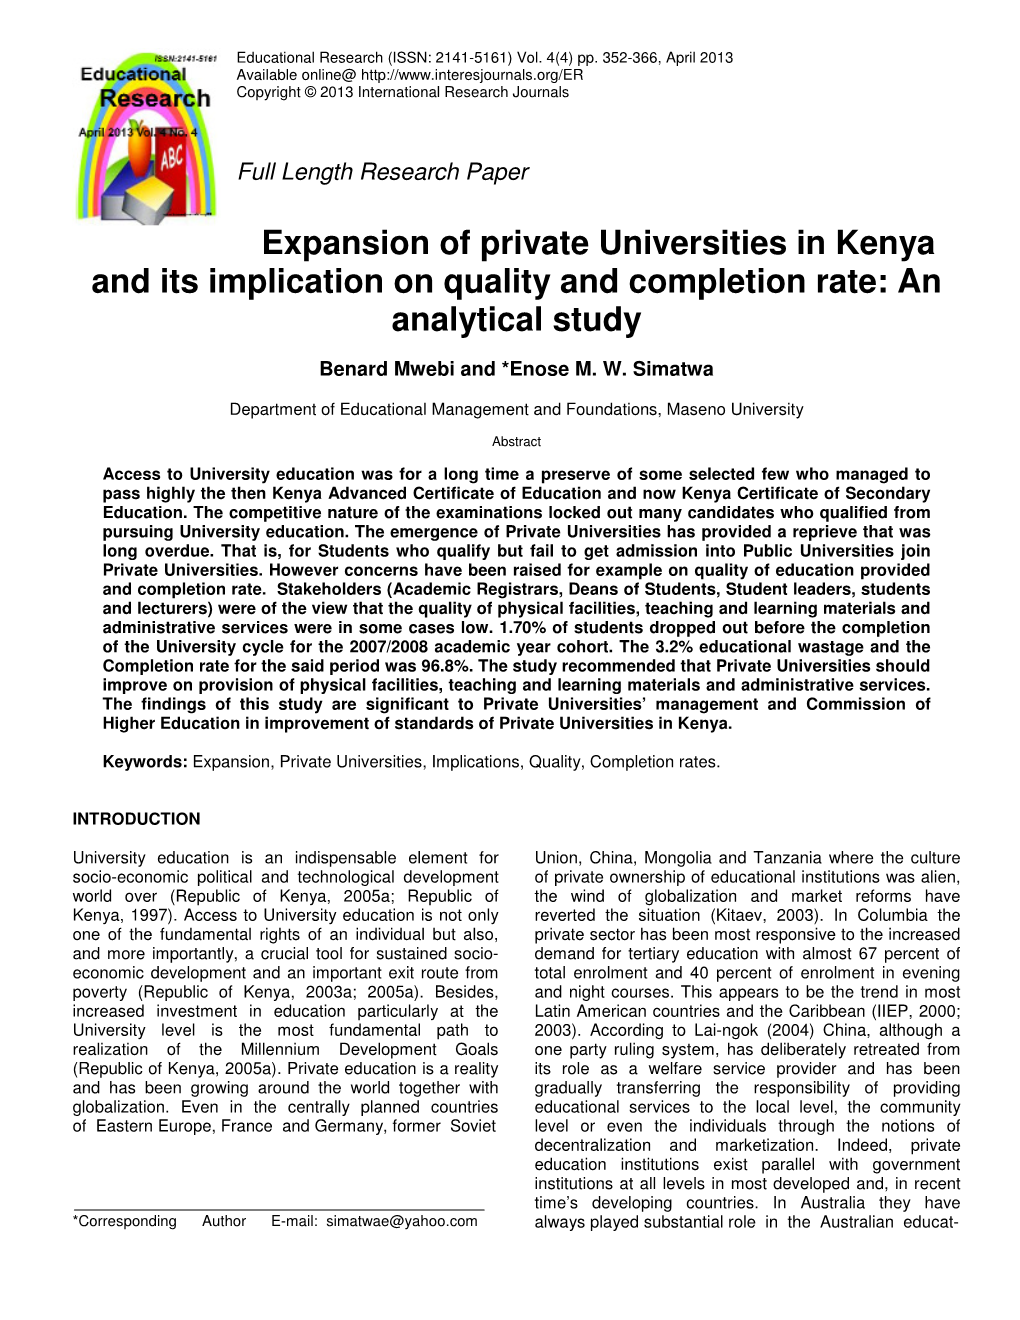 Expansion of Private Universities in Kenya and Its Implication on Quality and Completion Rate: an Analytical Study